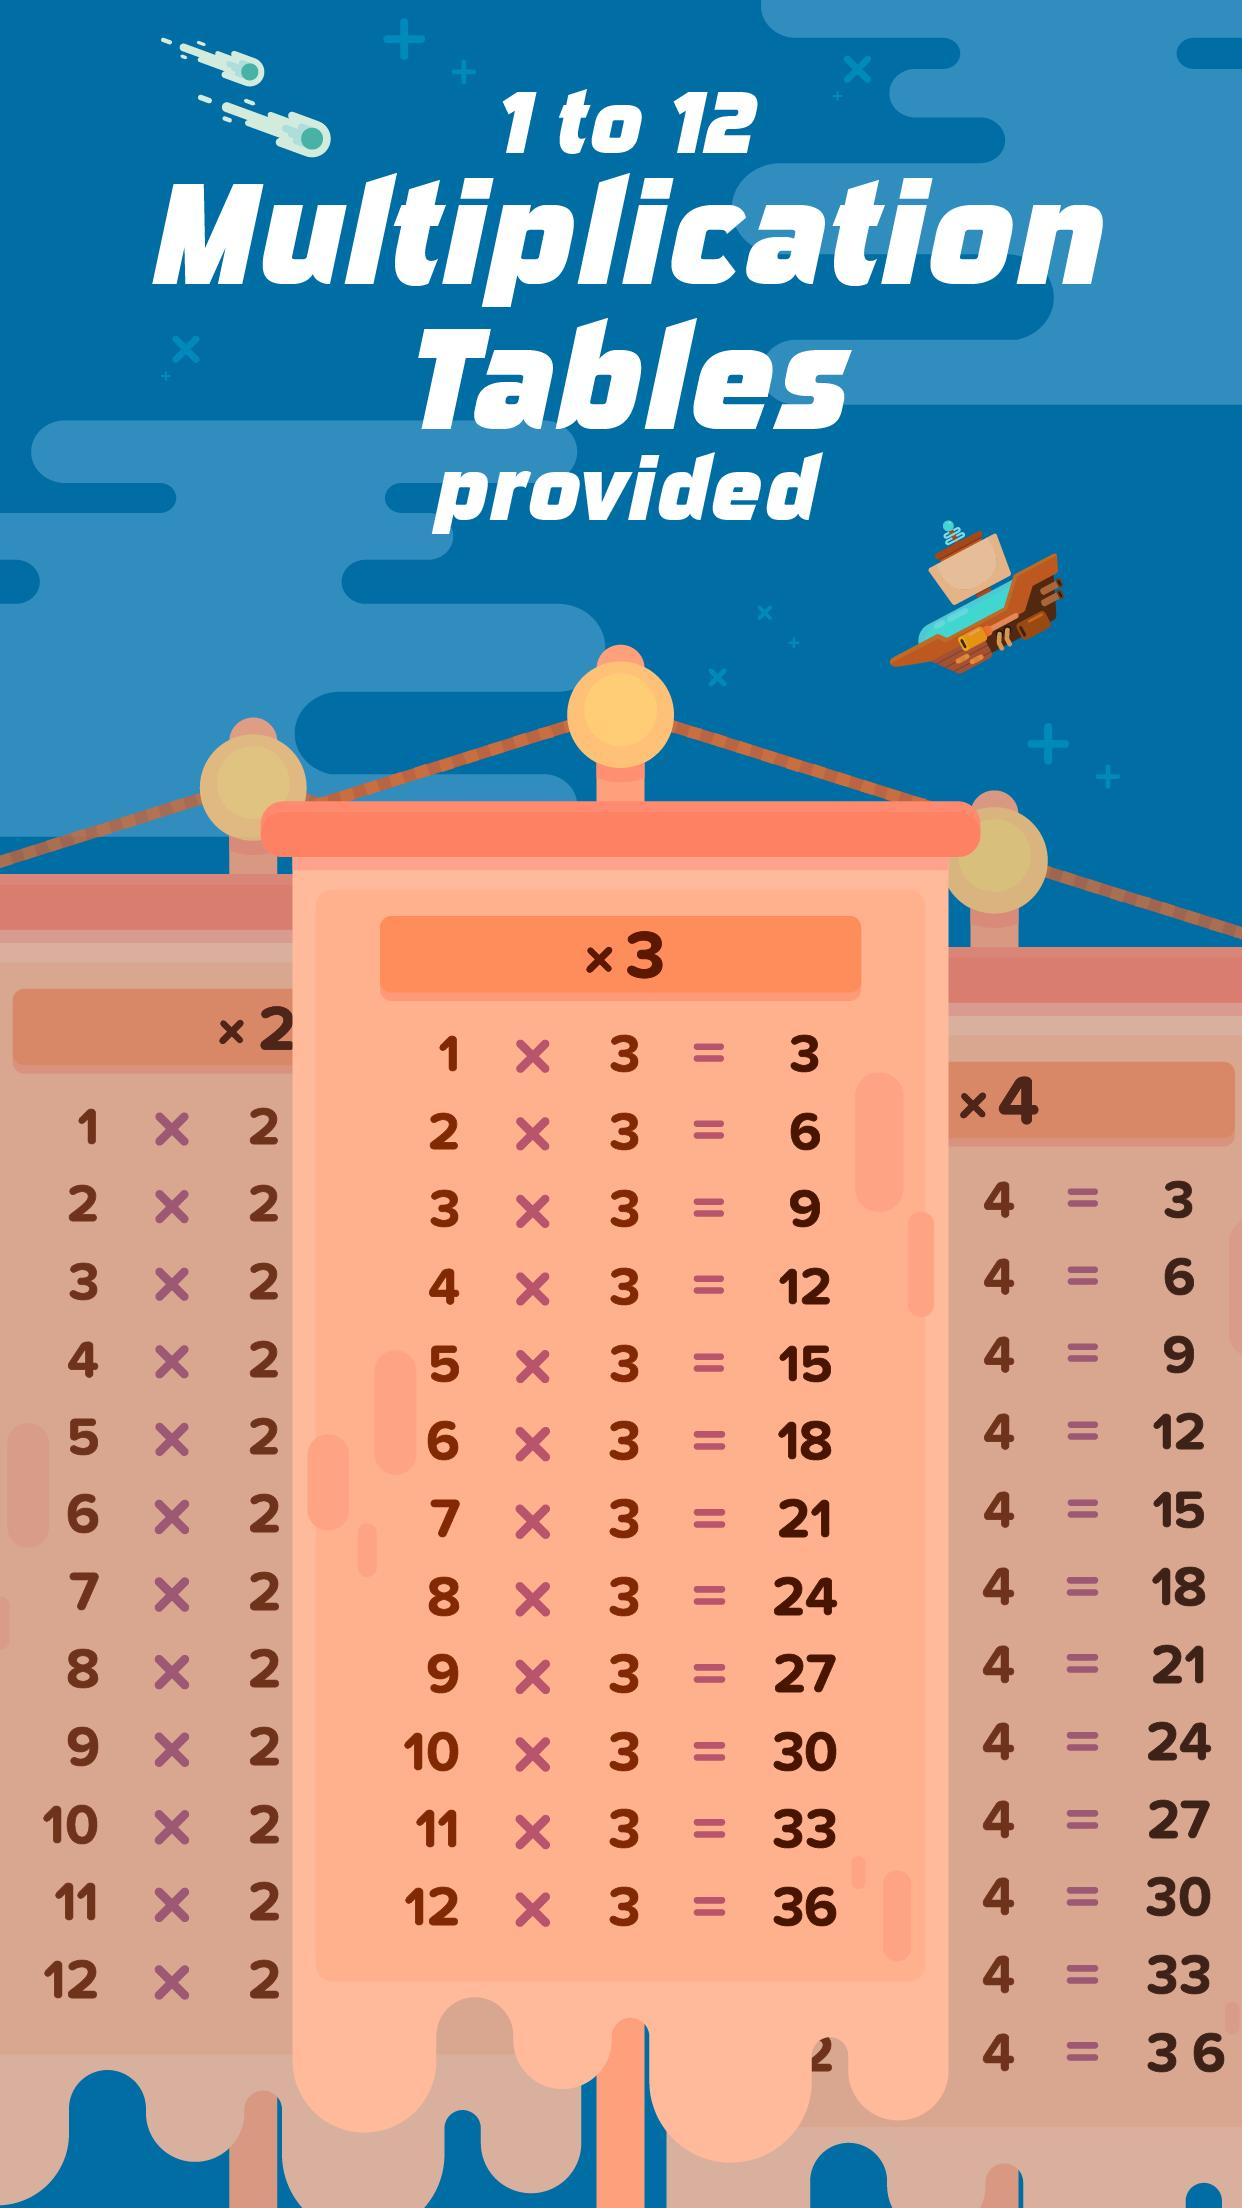 Multiplication Flash Cards App For Android - Apk Download